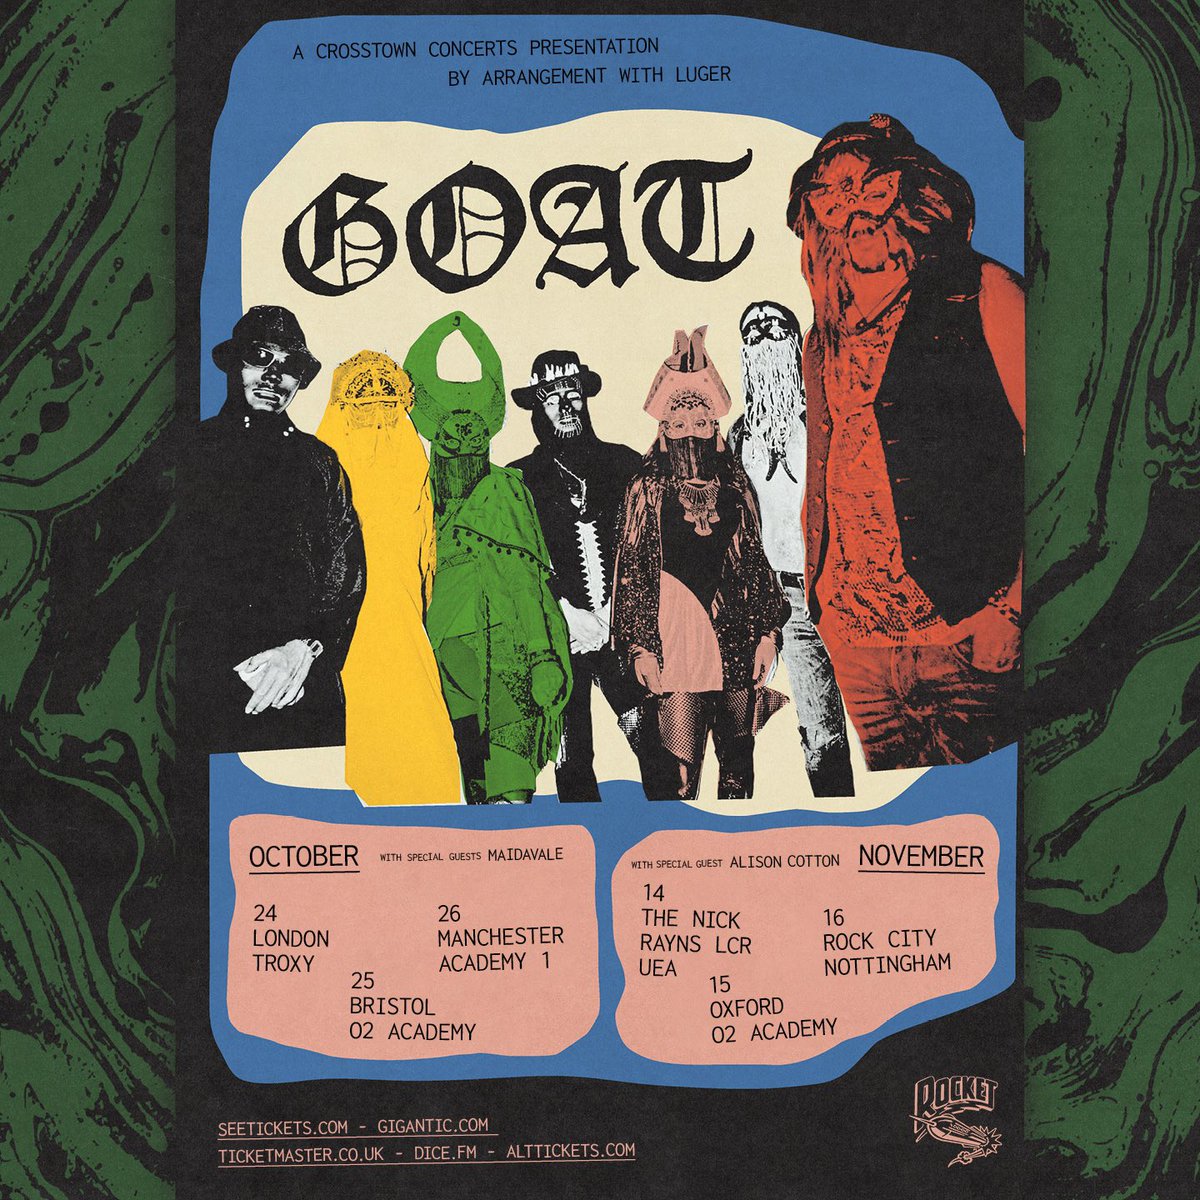 Special guests MaidaVale and Alison Cotton join Goat on tour this Autumn. Tickets are on sale here: crosstownconcerts.seetickets.com/artist/goat/70…